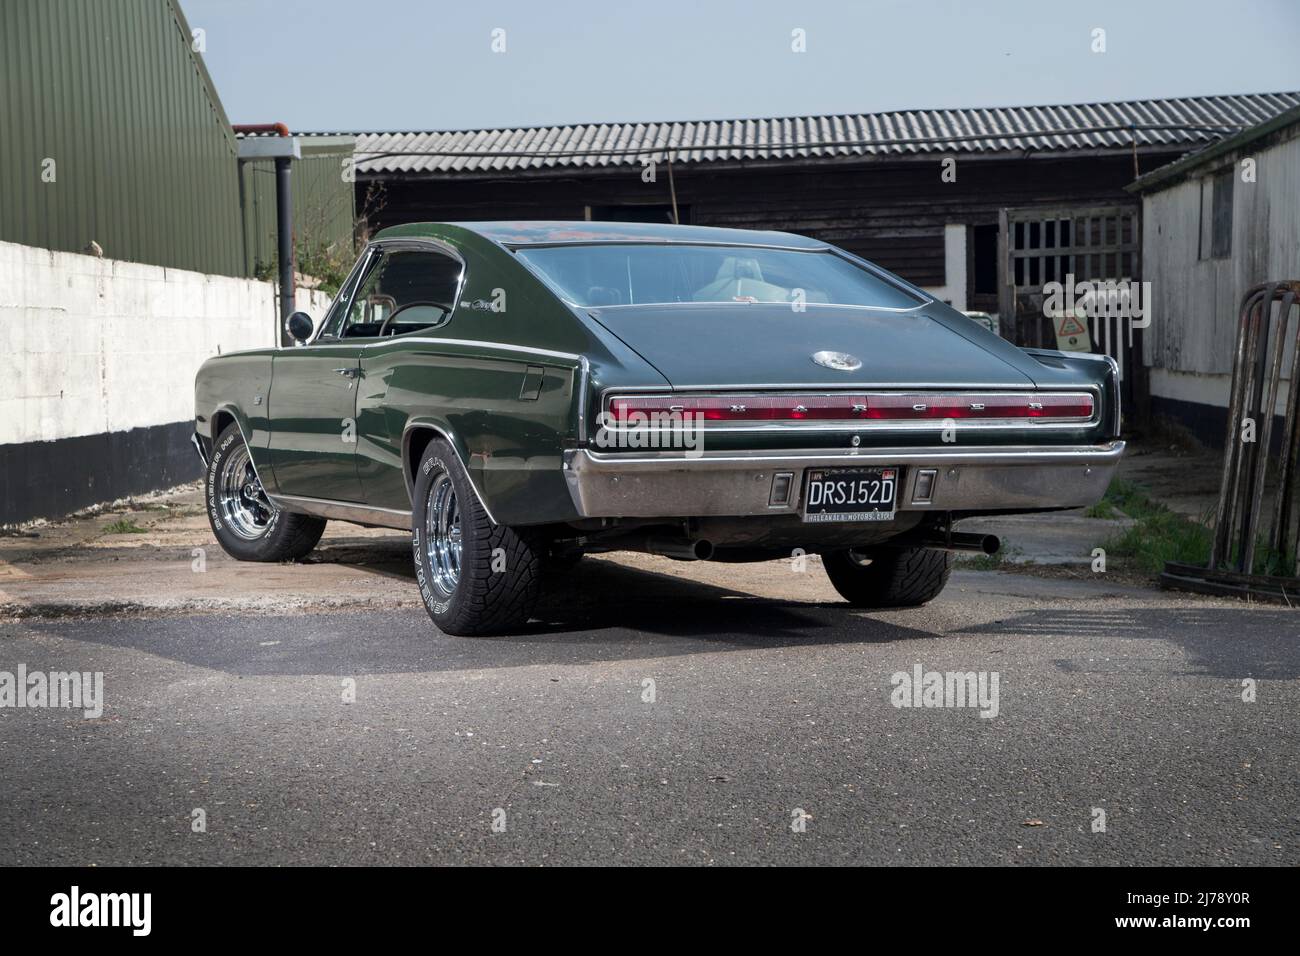 1967 Dodge Charger classic American muscle car Stock Photo